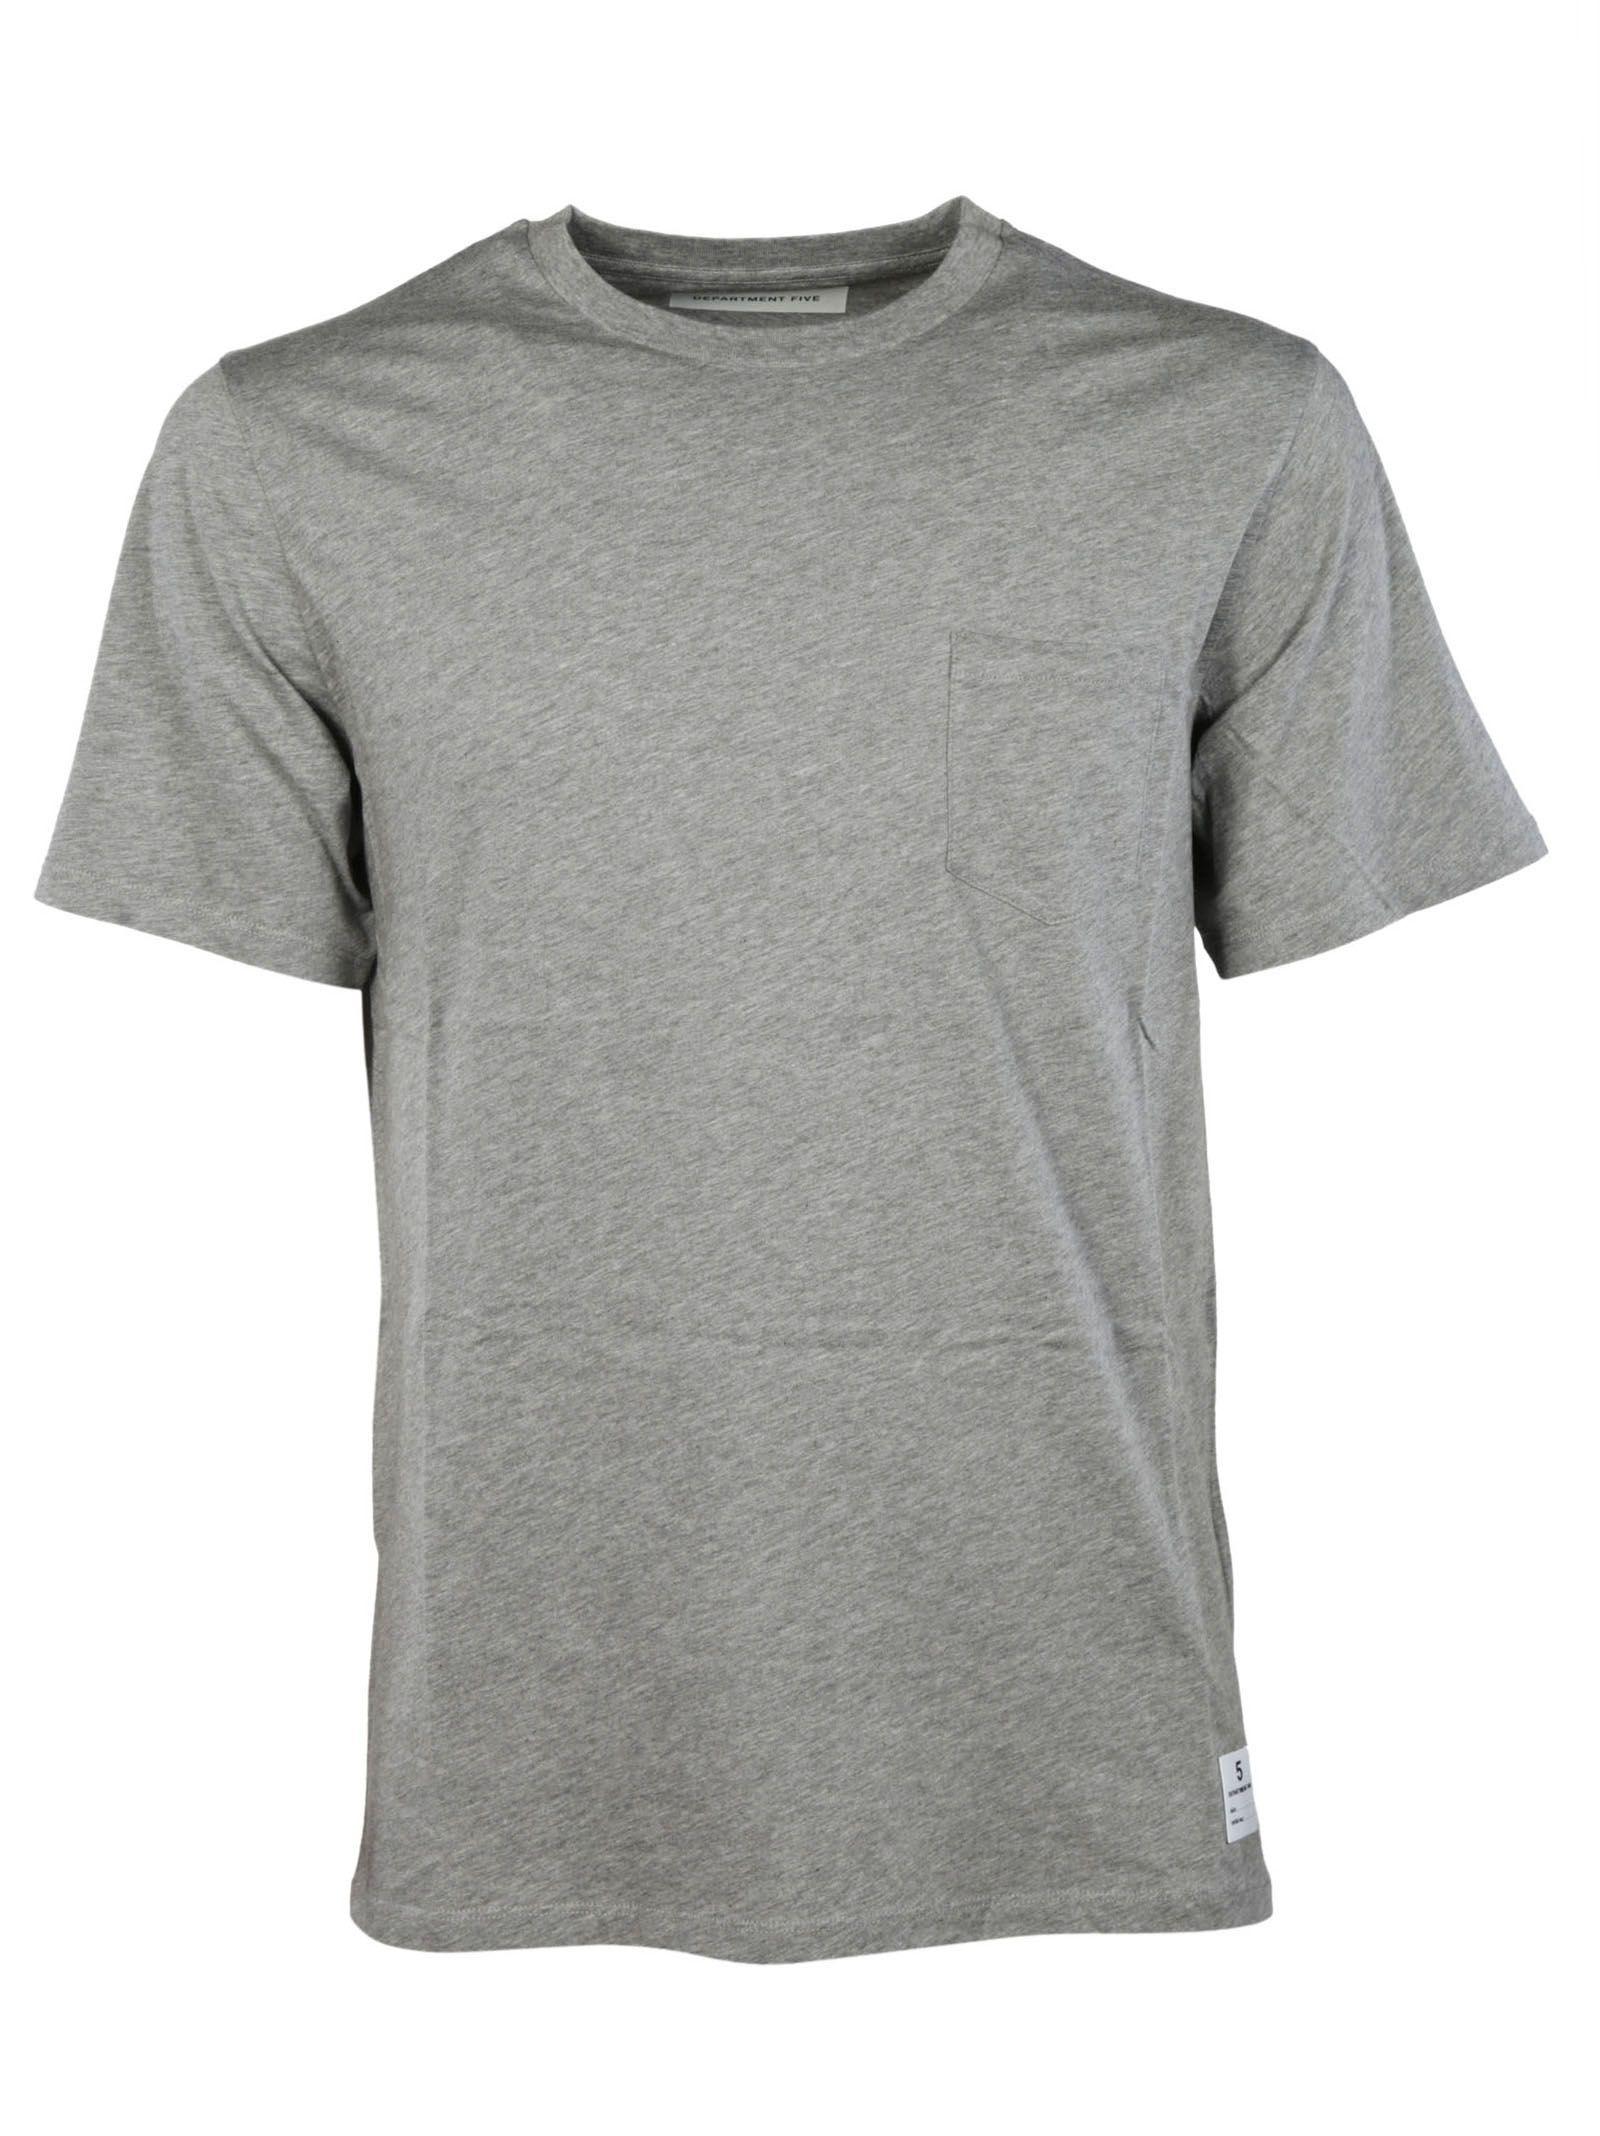 Department 5 Grey Cotton T-shirt in Gray for Men - Lyst